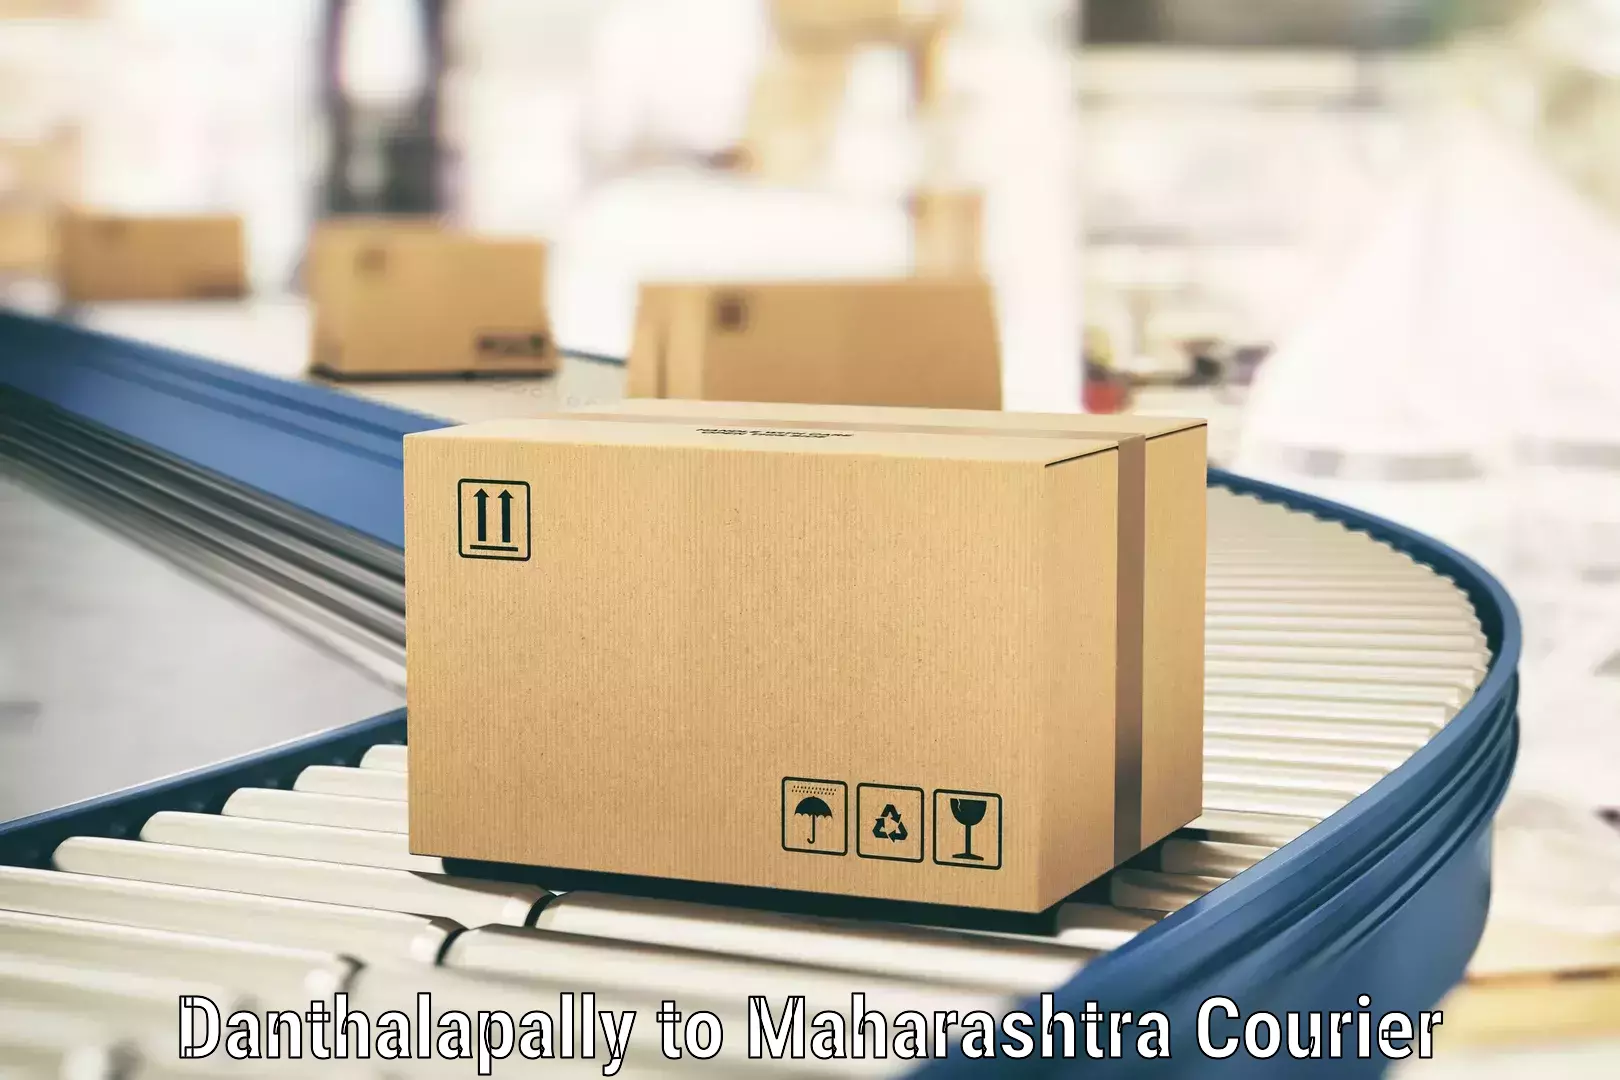 High-priority parcel service Danthalapally to Nira